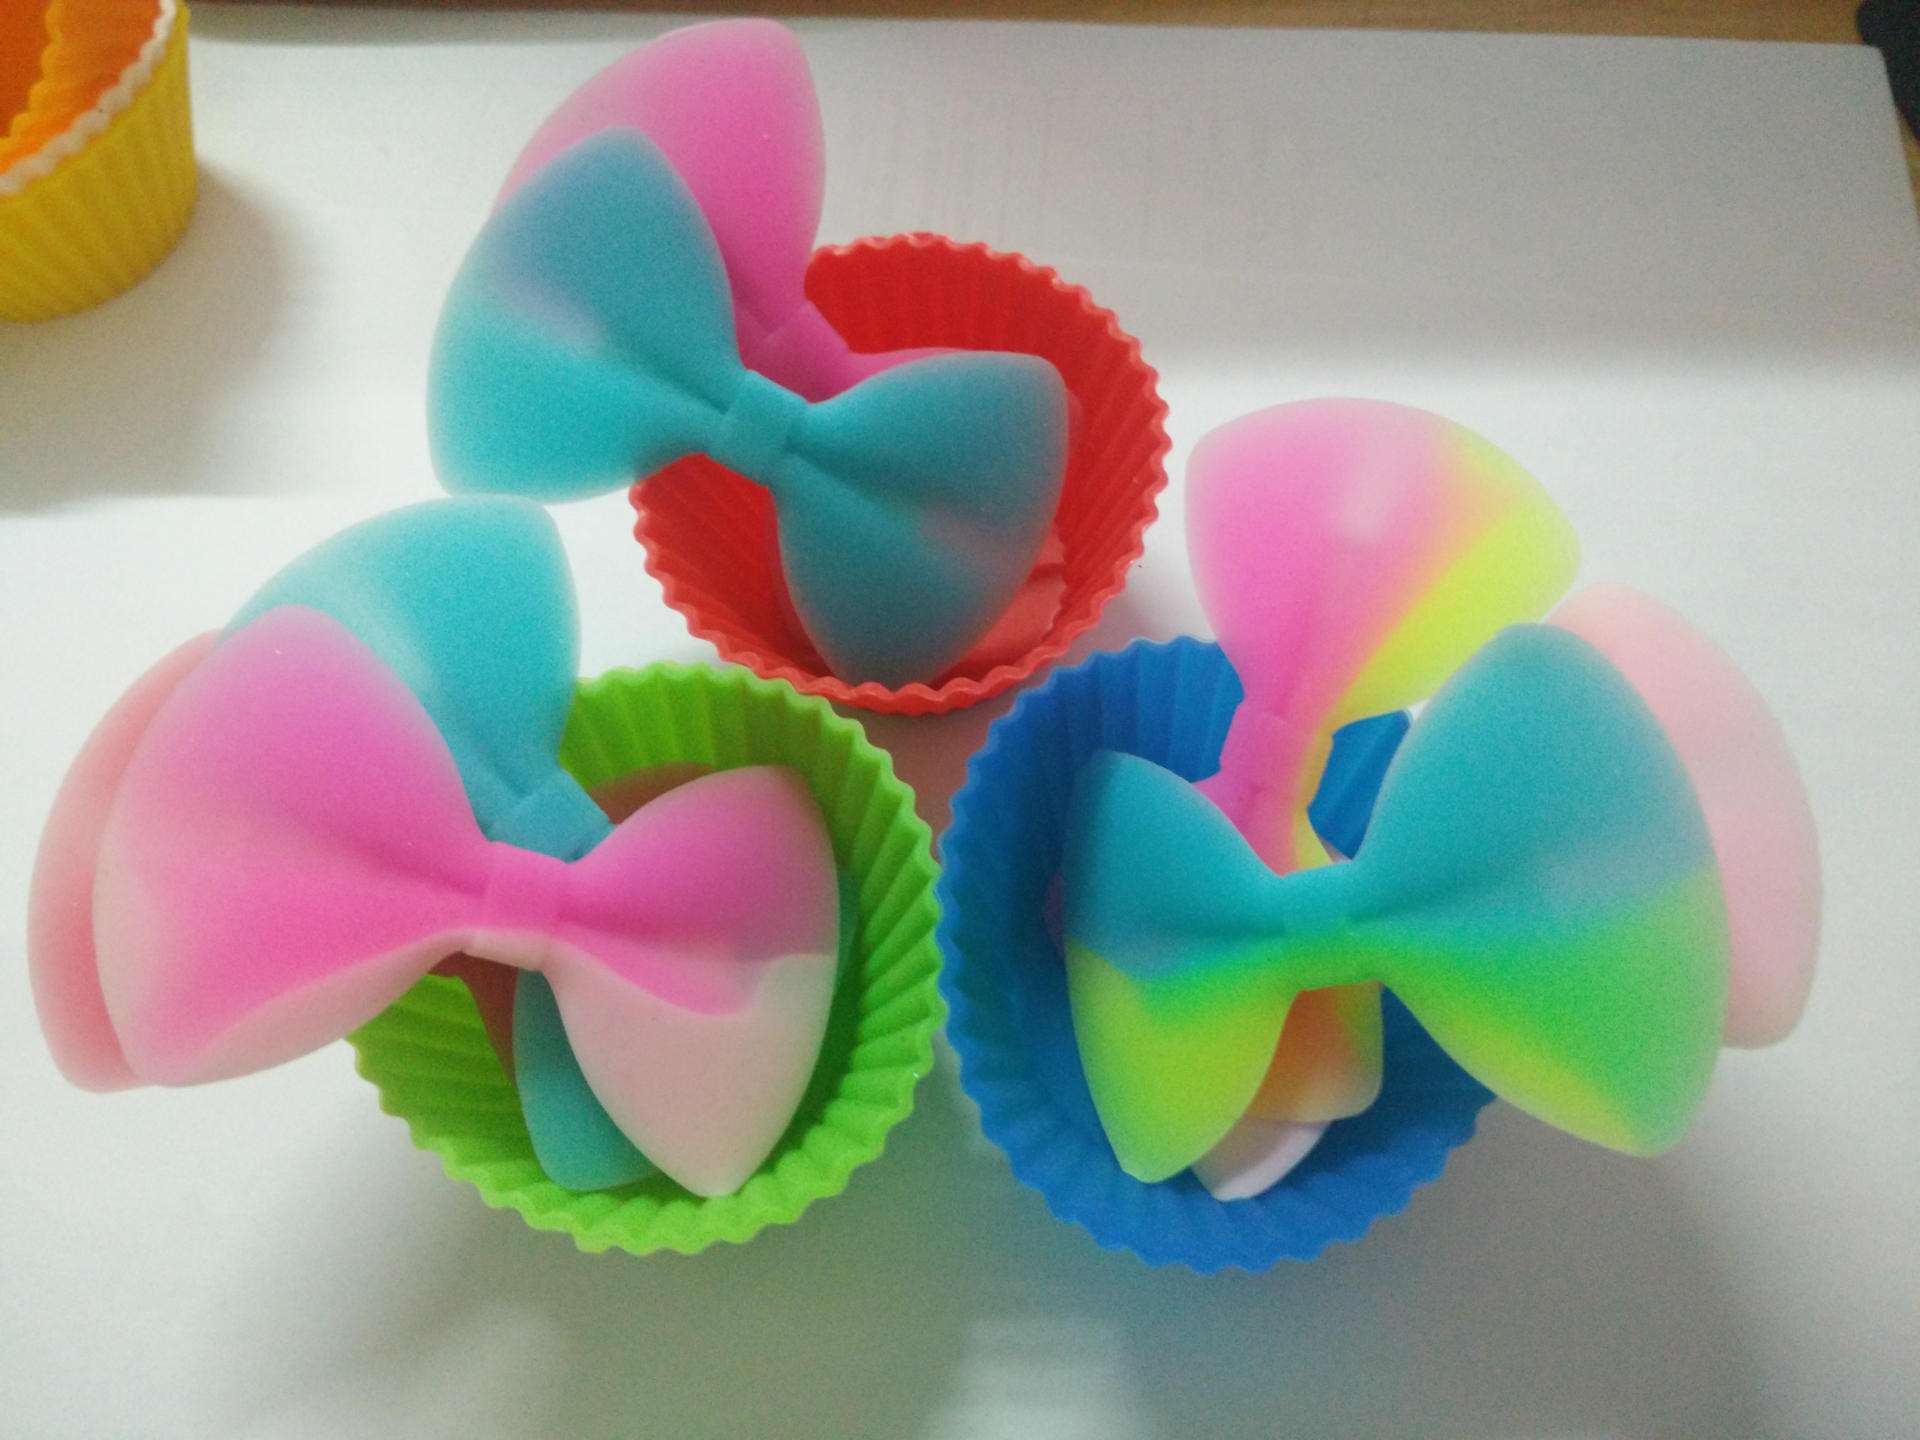 Silicone hairpin is more suitable for children than plastic hairpin and metal hairpin